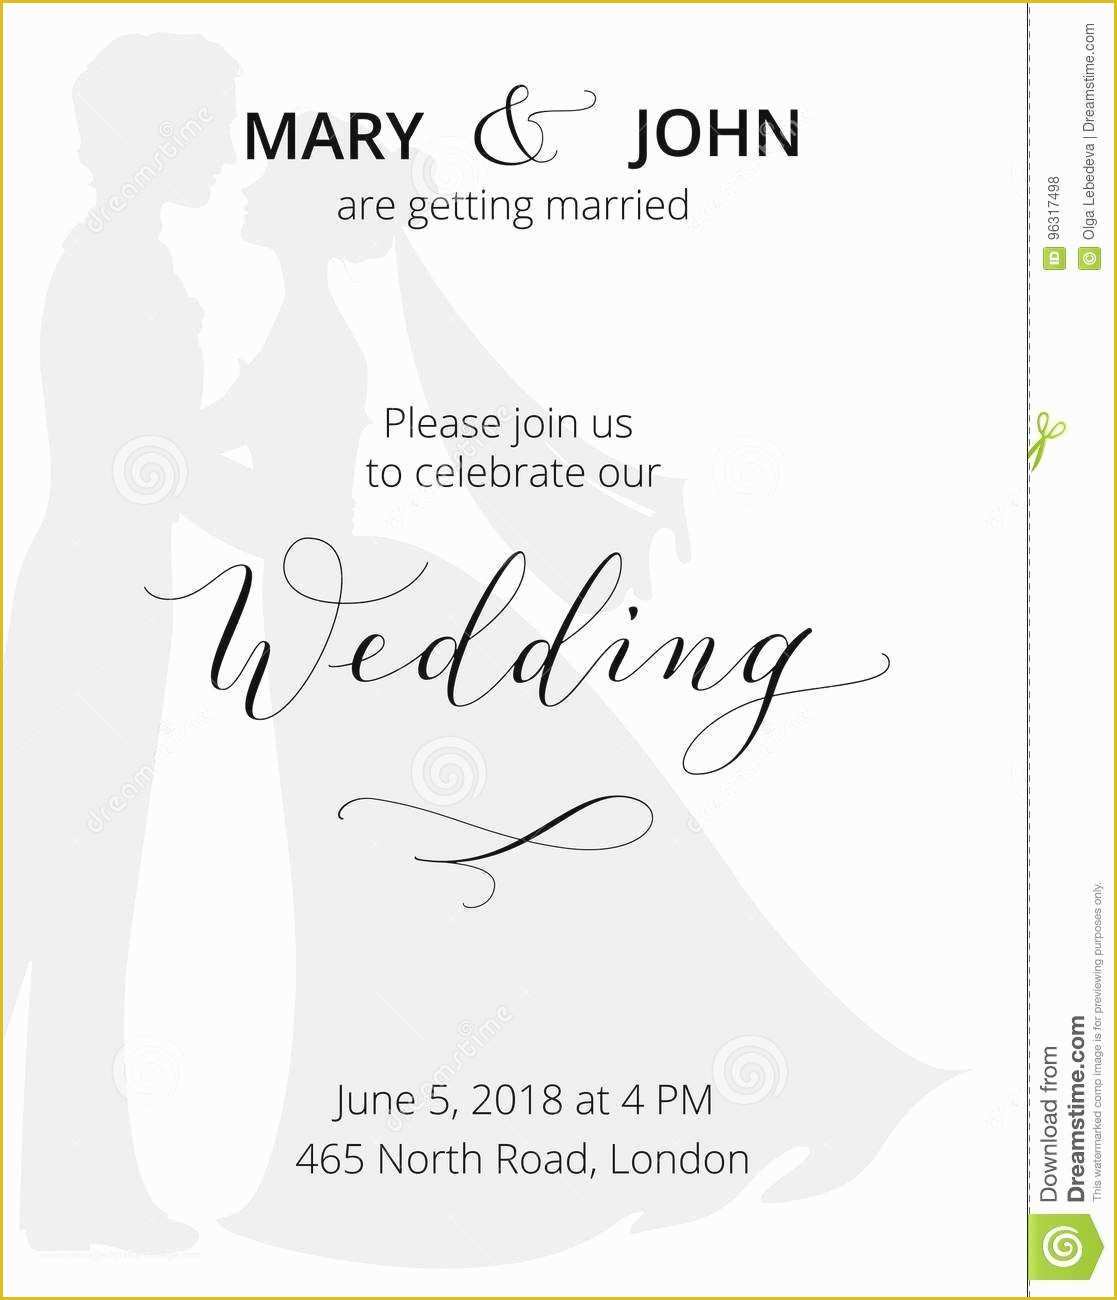 Free Email Wedding Invitation Templates Of Wedding Save the Date Email Wedding Invitation Templates